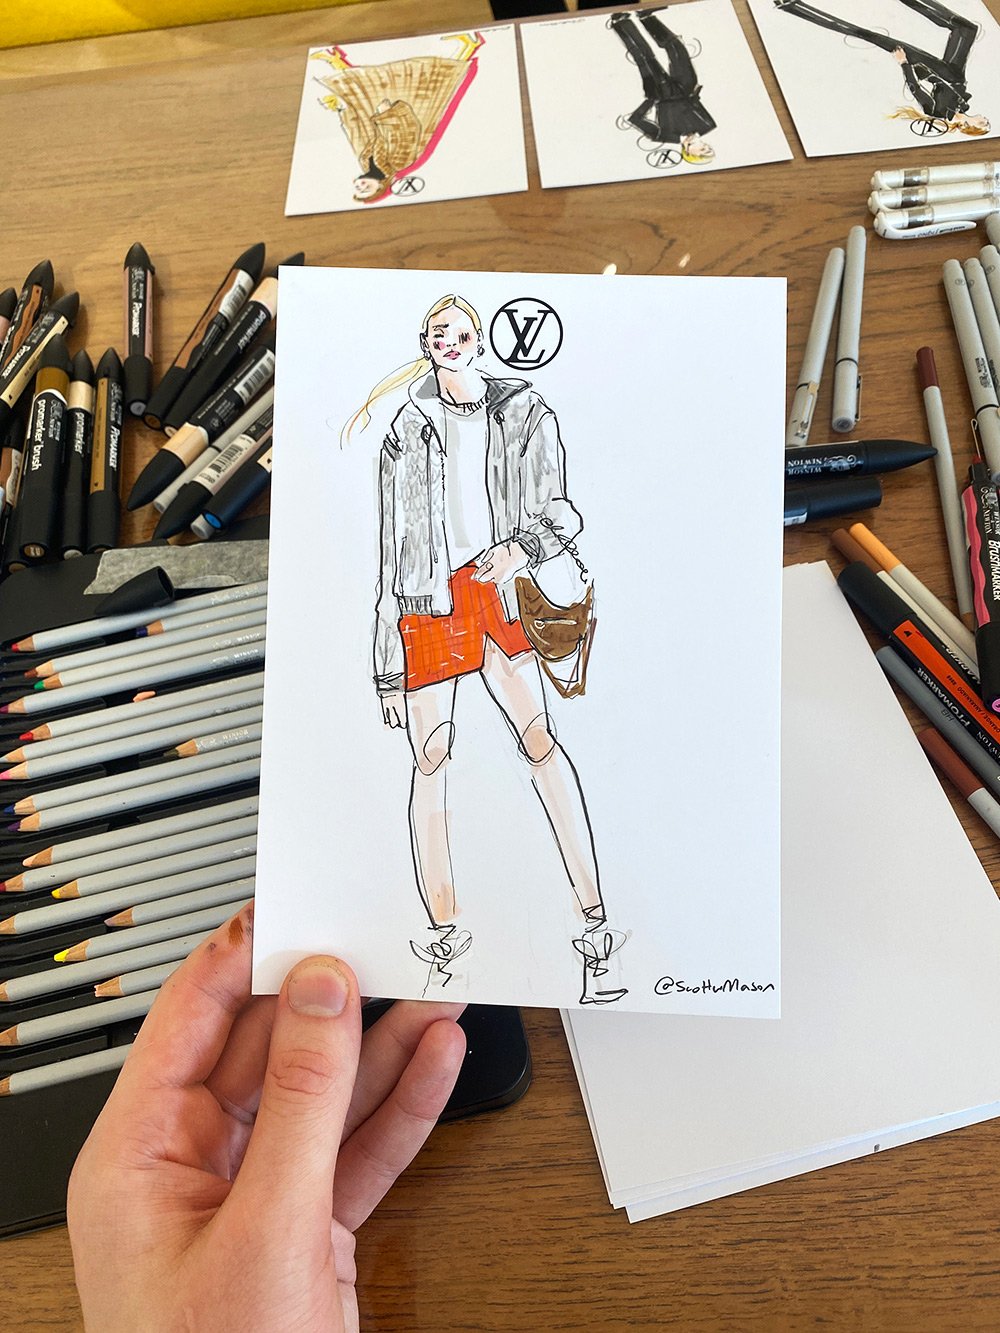 Illustrating clients live at the Sloane Street Boutique for Louis Vuitton